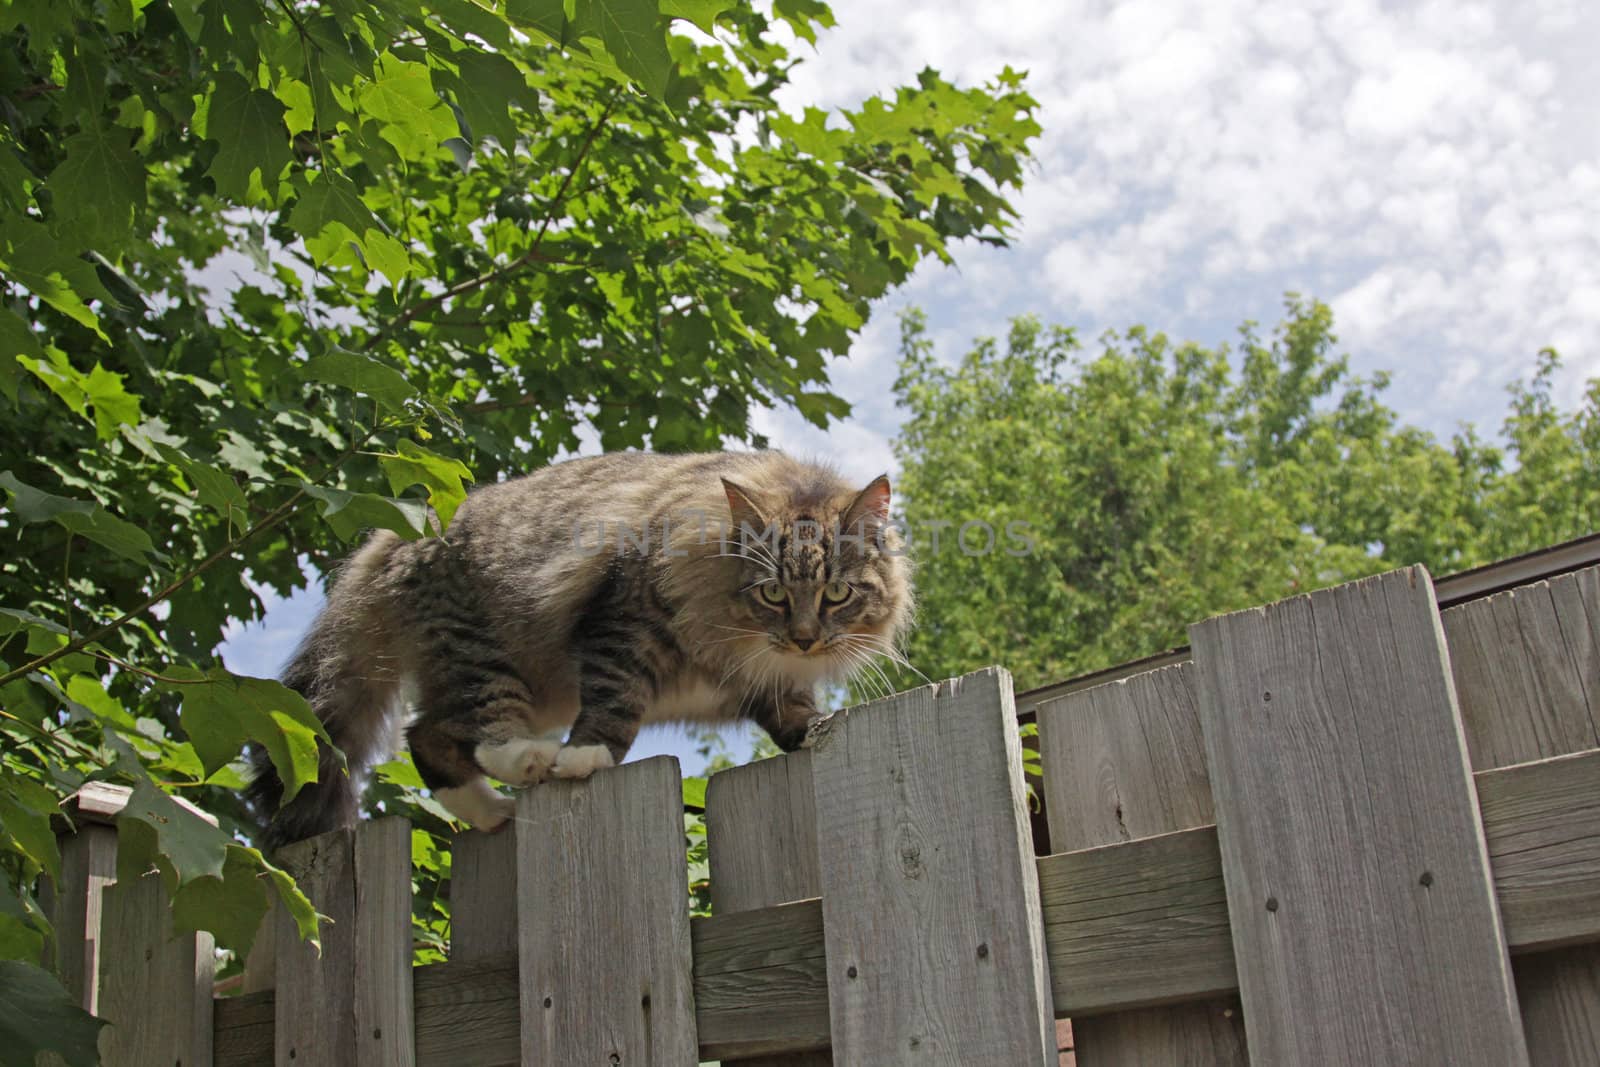 A cat scaling a fence on the prowl.